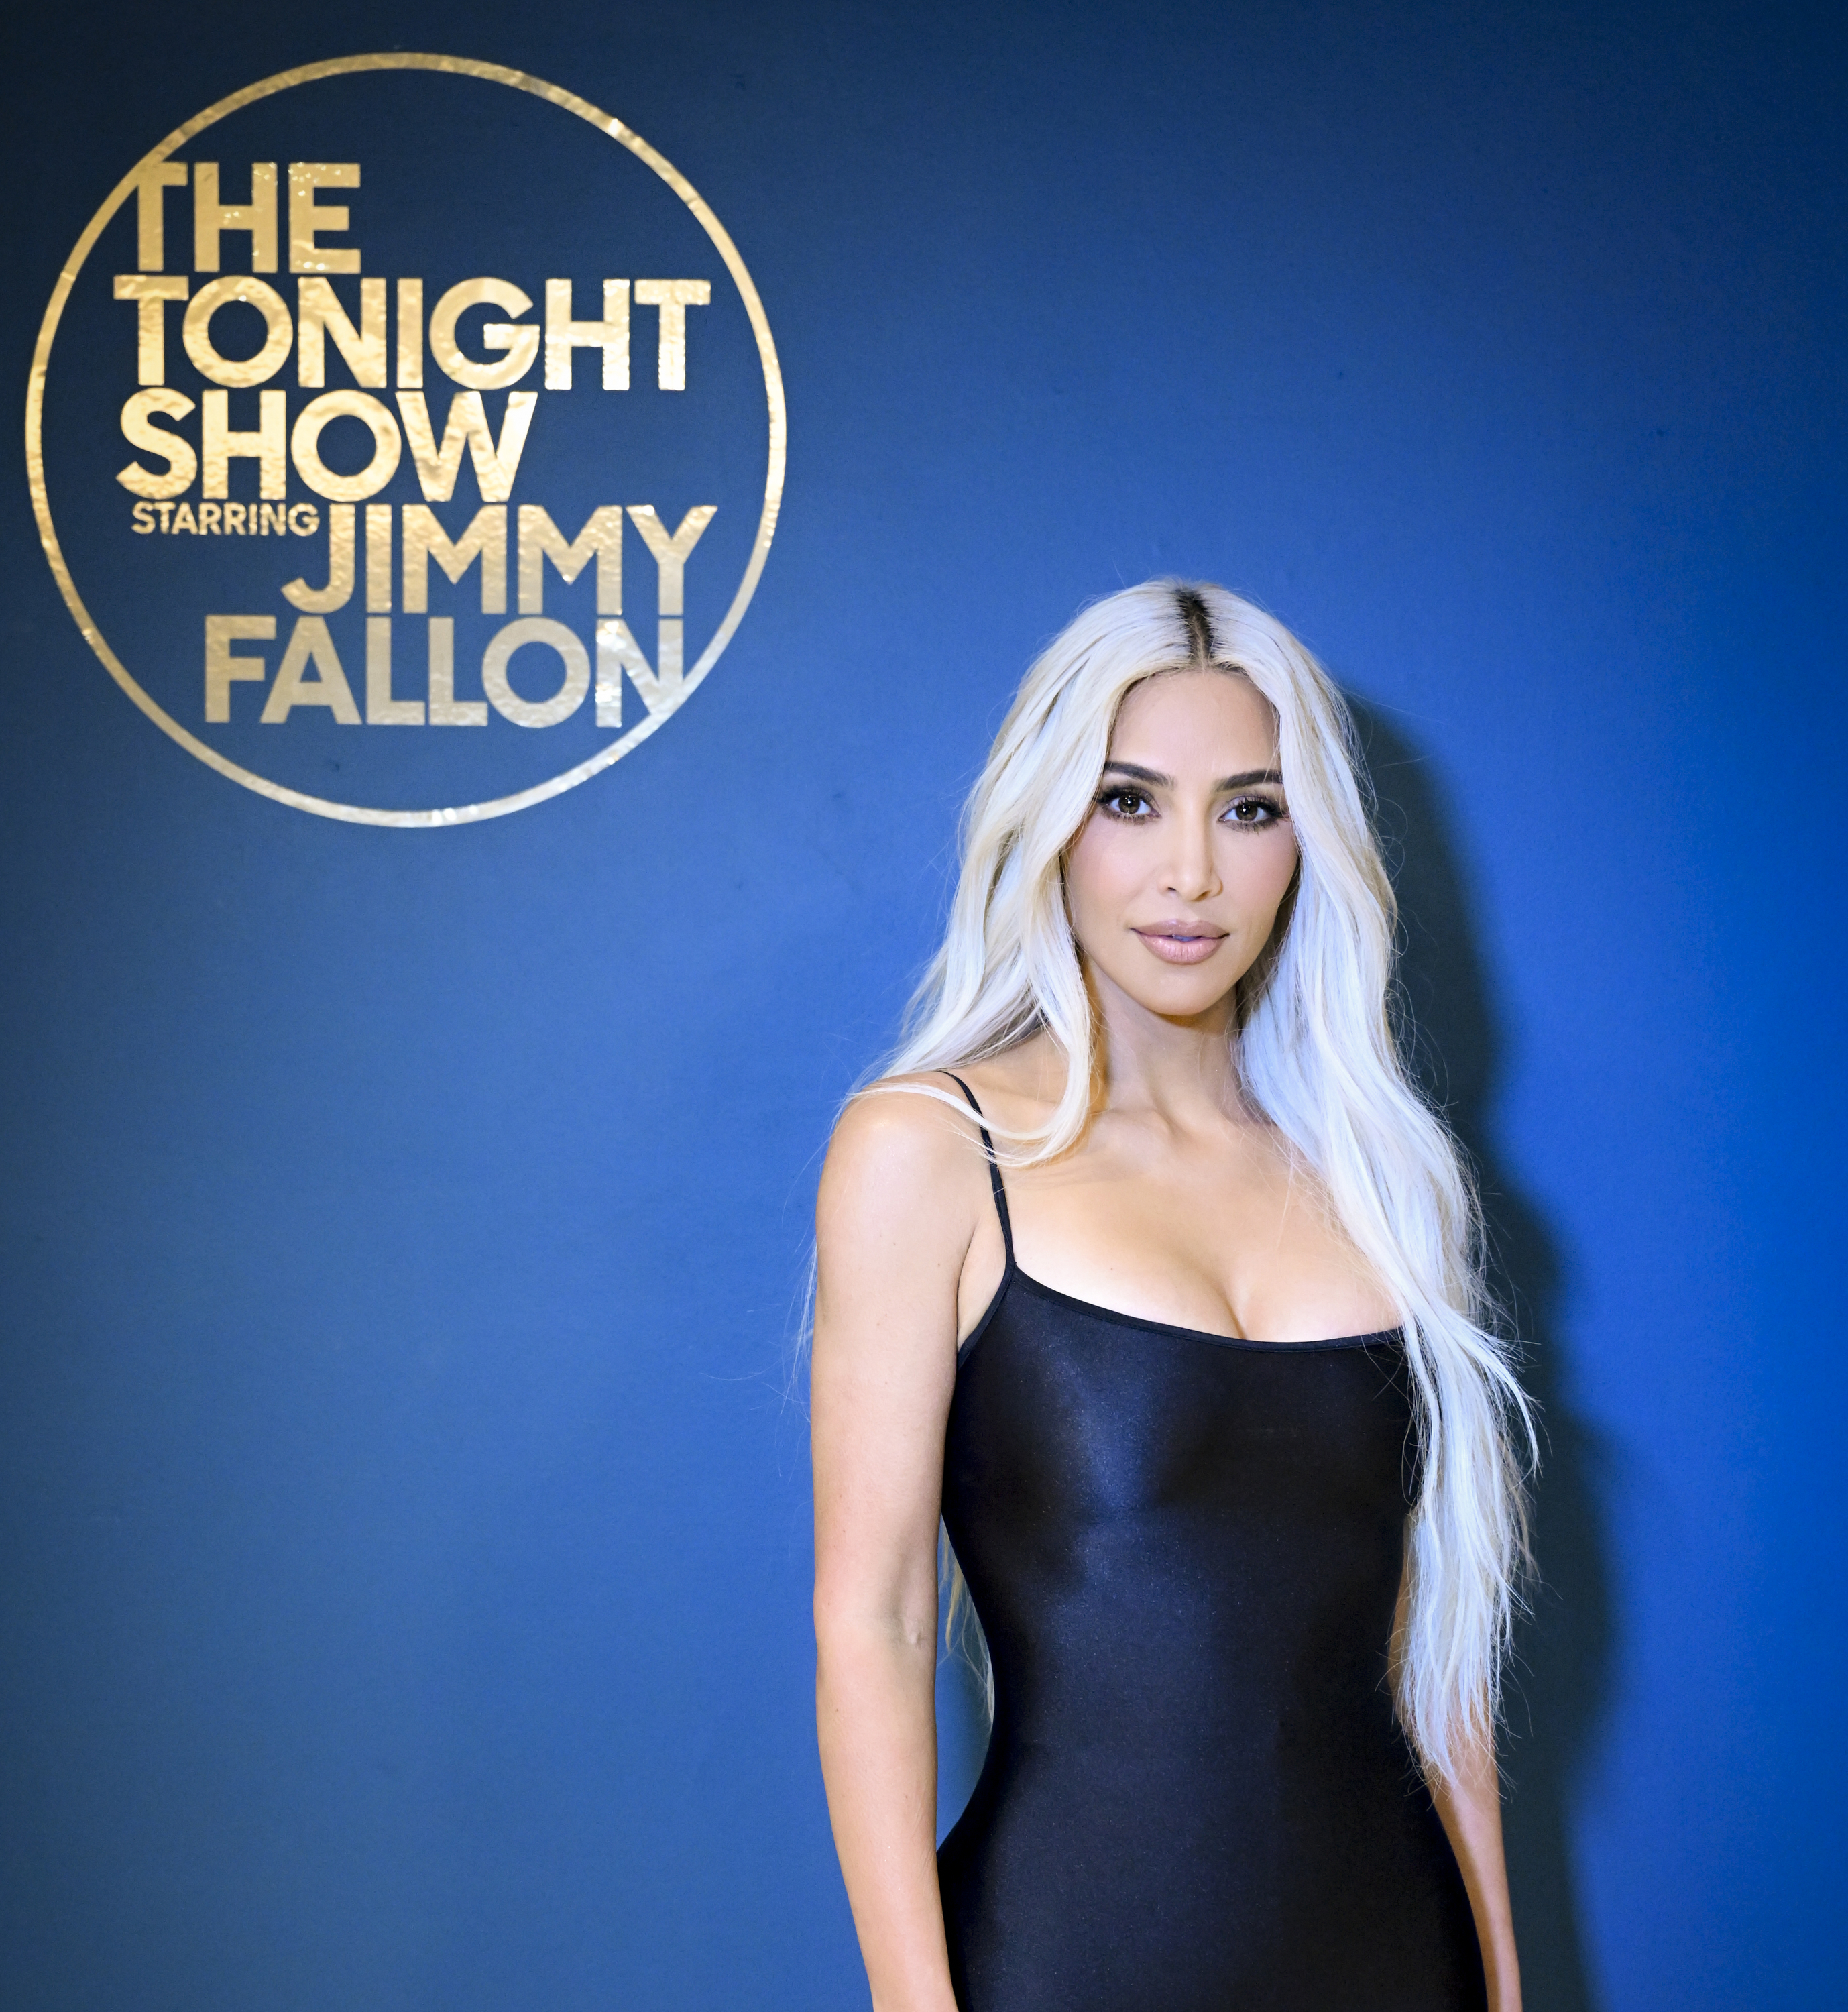 Kim Kardashian in a spaghetti0strap dress, standing before &quot;The Tonight Show Starring Jimmy Fallon&quot; sign